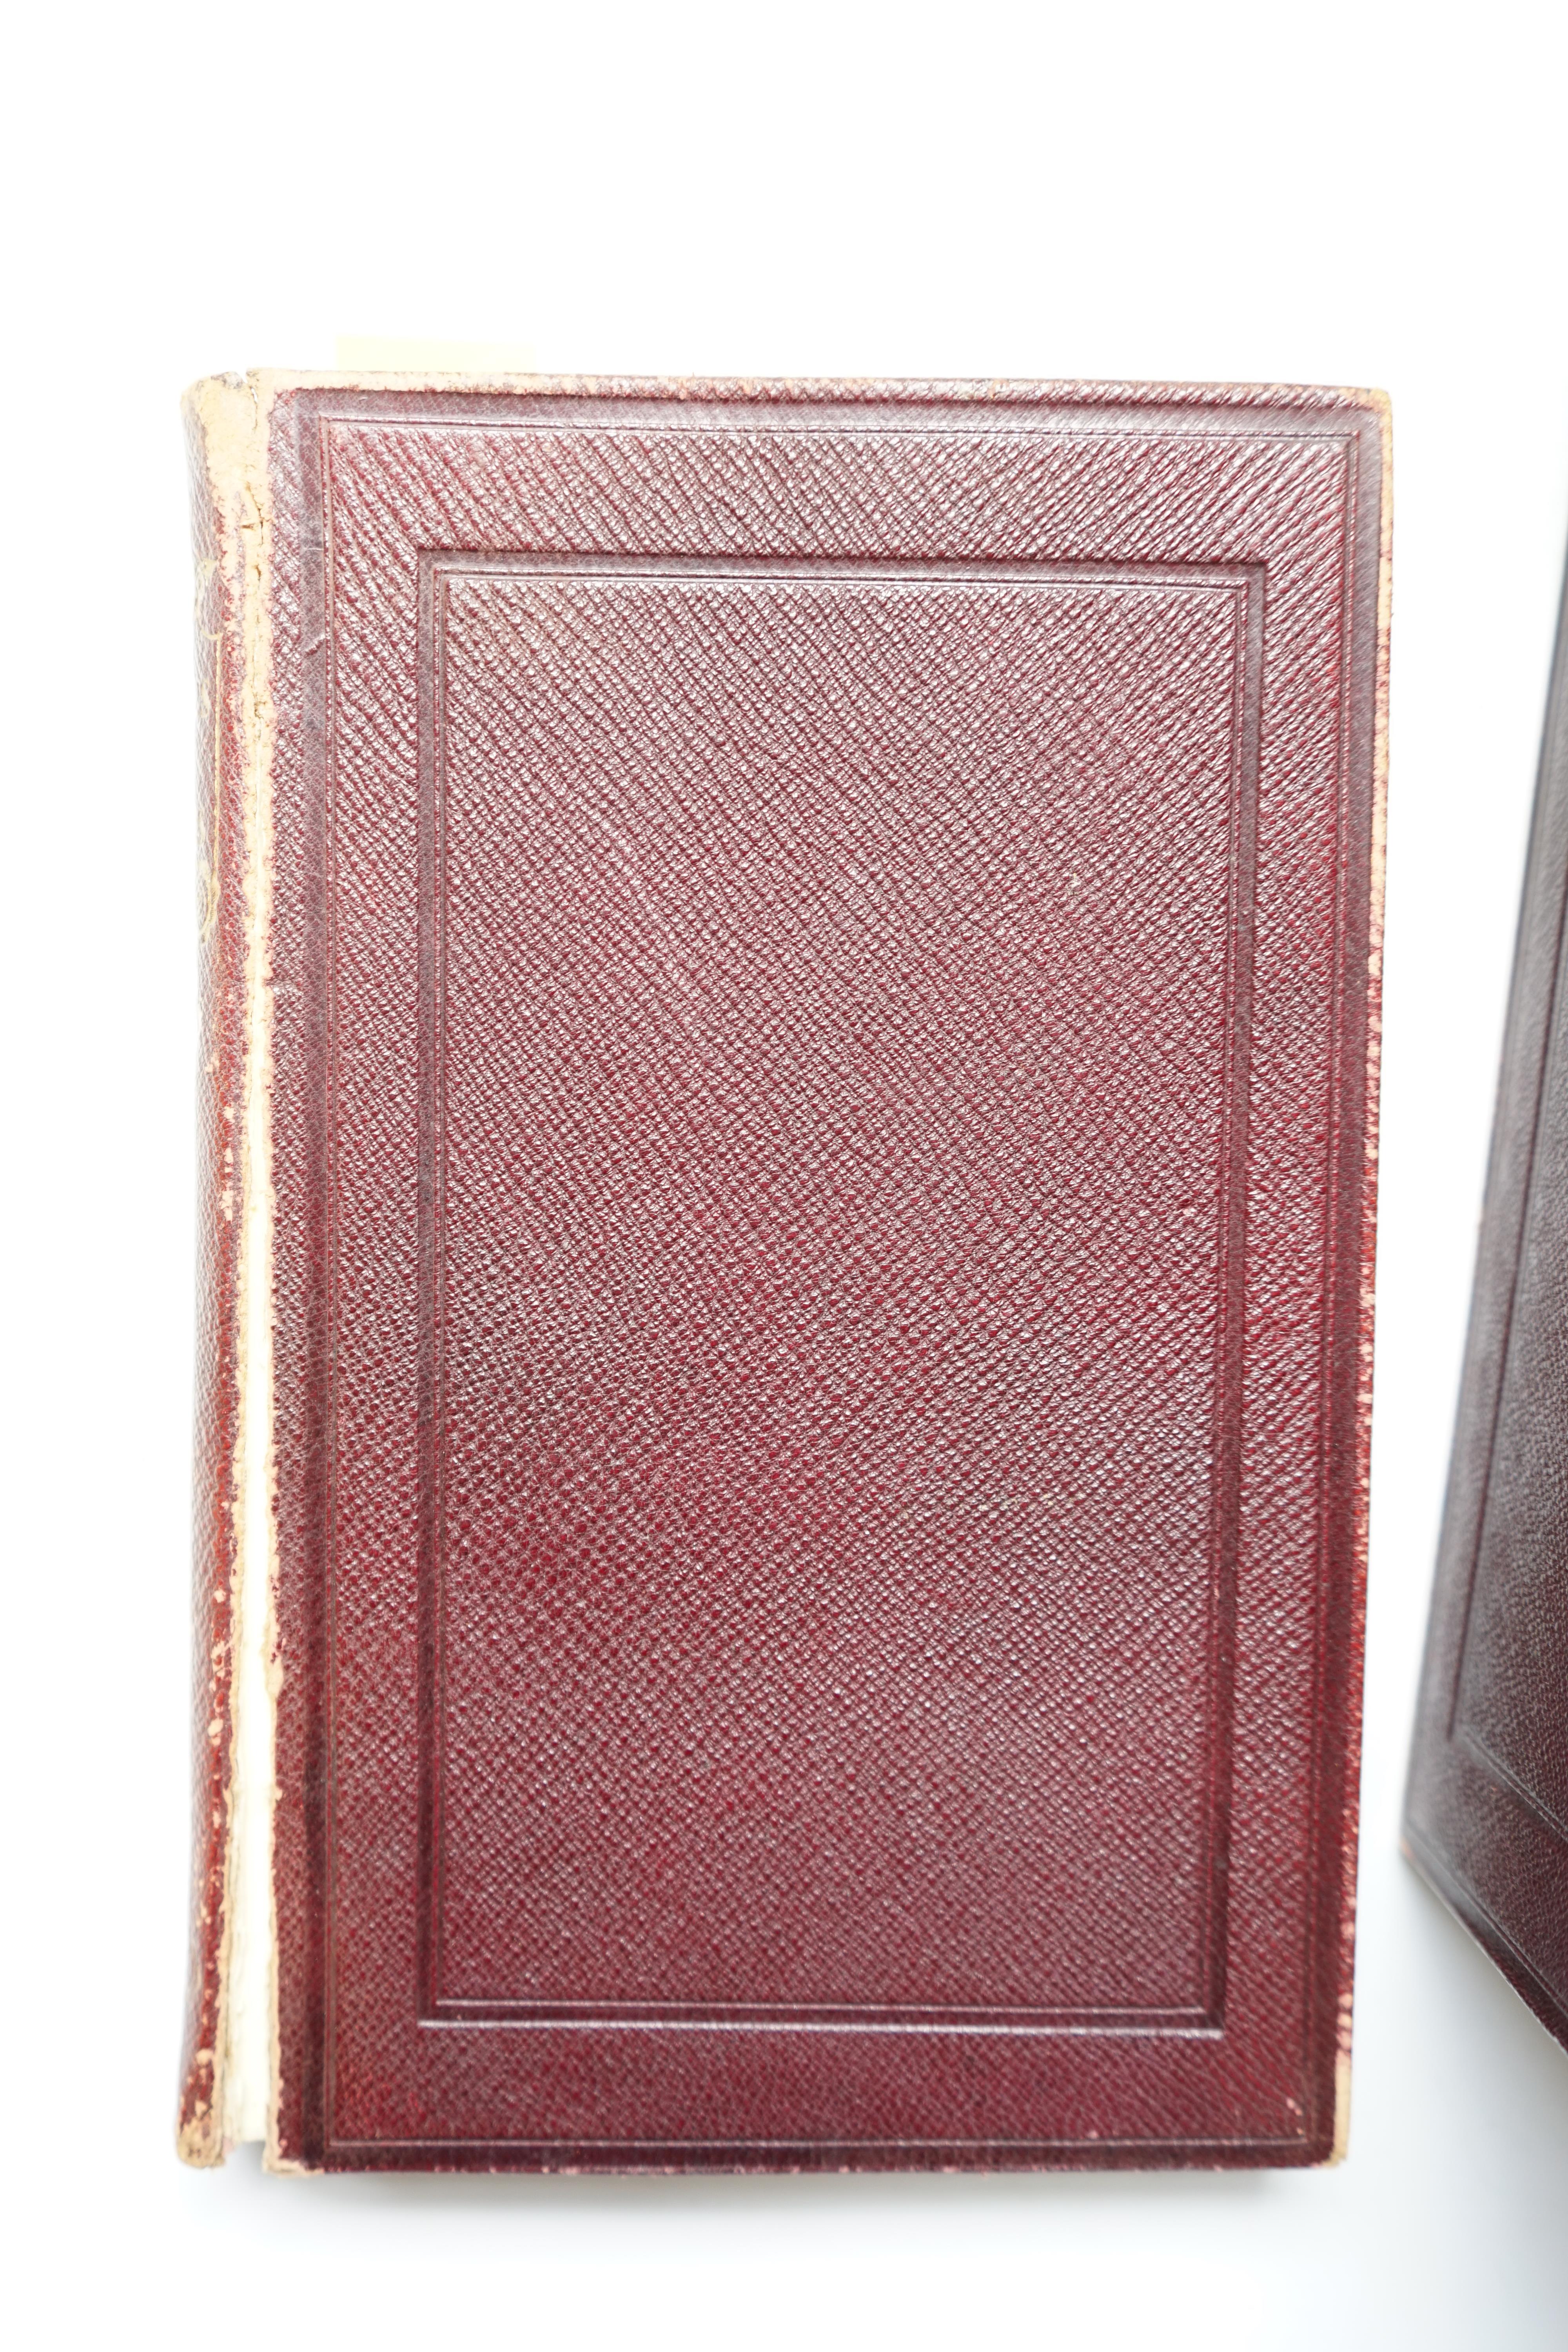 Byron, George Gordon Noel, Lord - The Works of Lord Byron, 6 vols, 8vo, red morocco, with portrait frontis to vol 1, John Murray, 1825 and, vols 7 & 8 uniformly bound, from an 8 volume set, John Murray, 1824, (8).